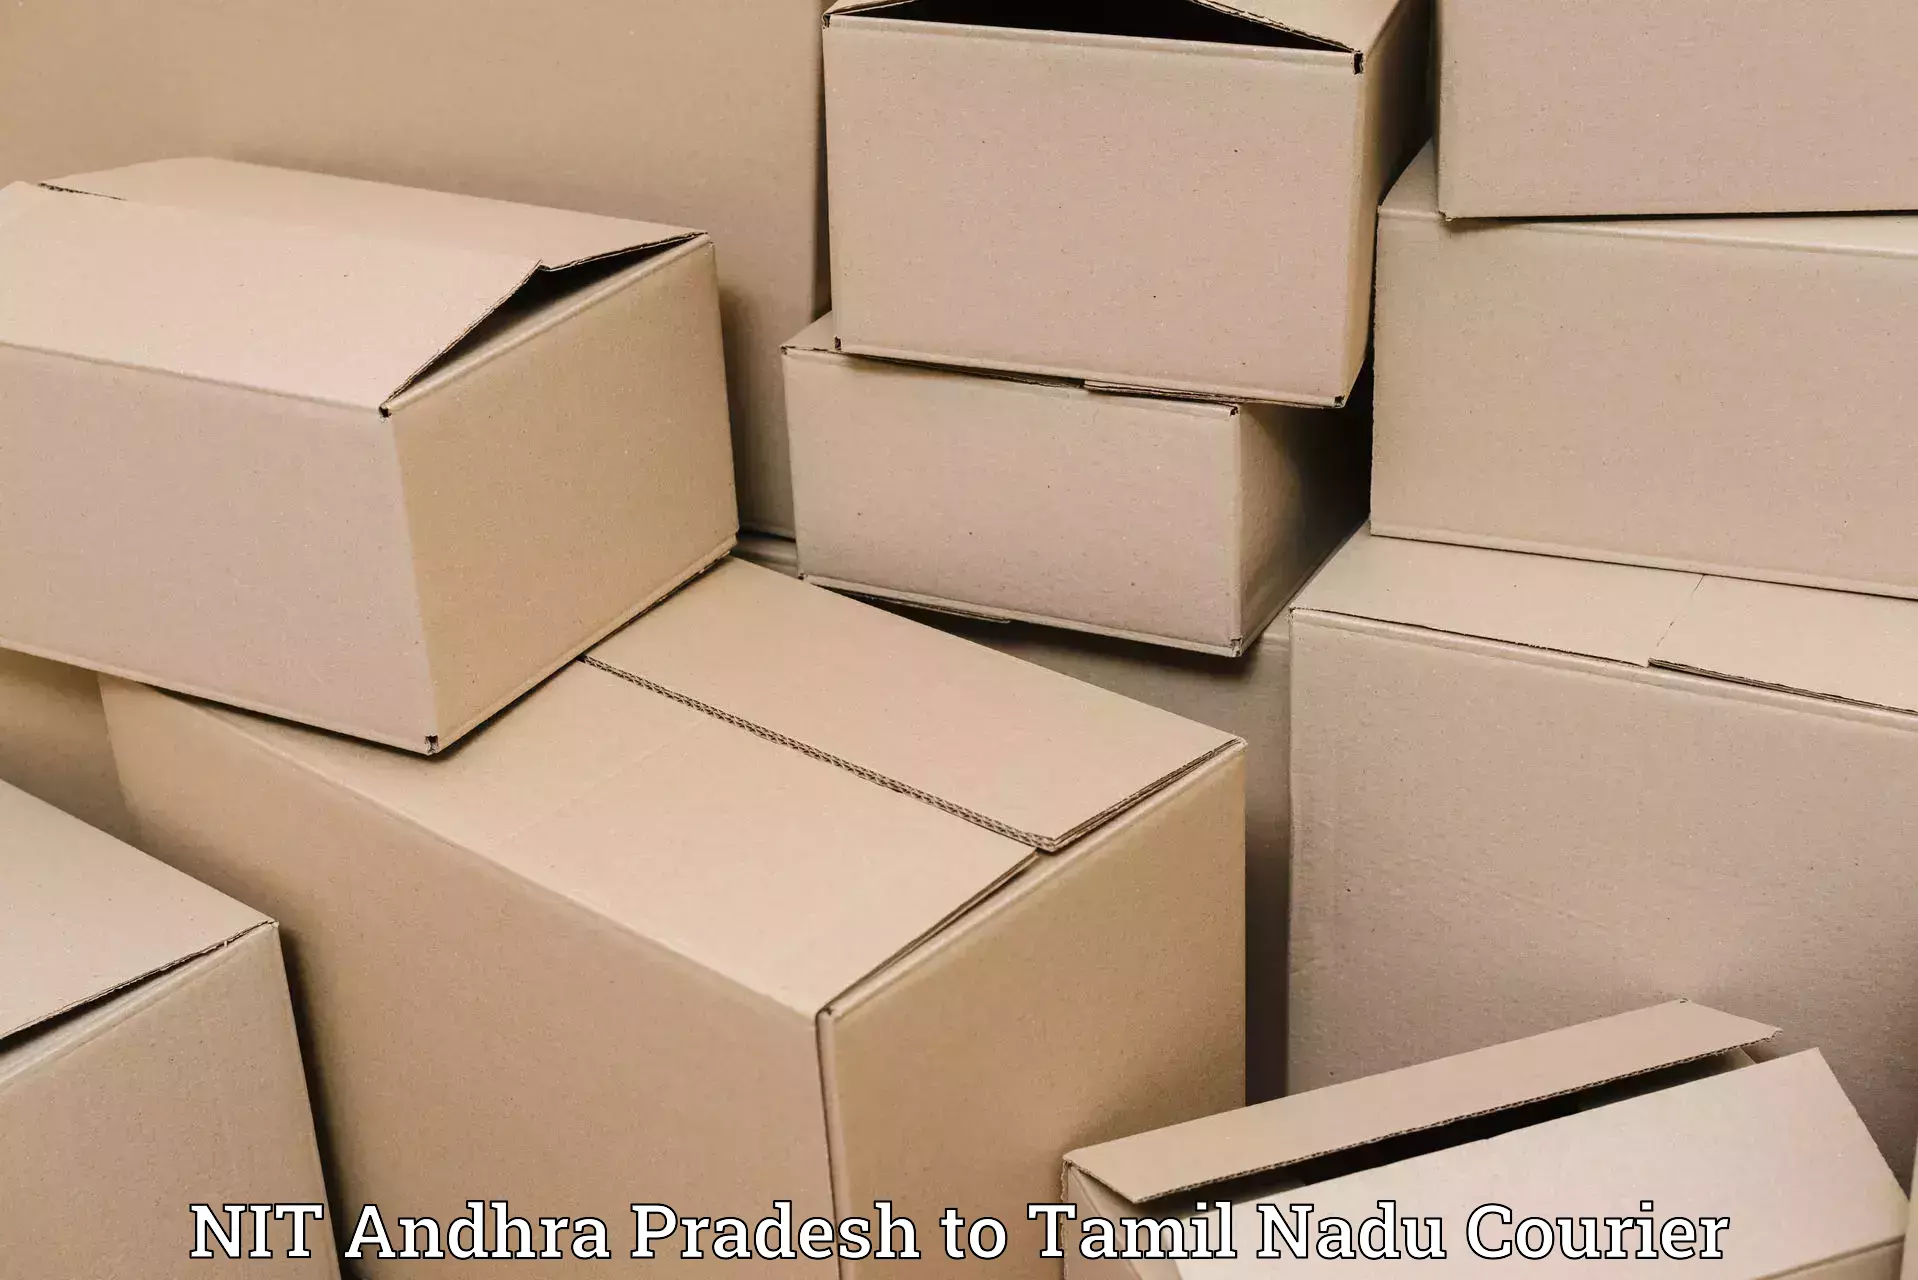 Customer-friendly courier services in NIT Andhra Pradesh to Tamil Nadu